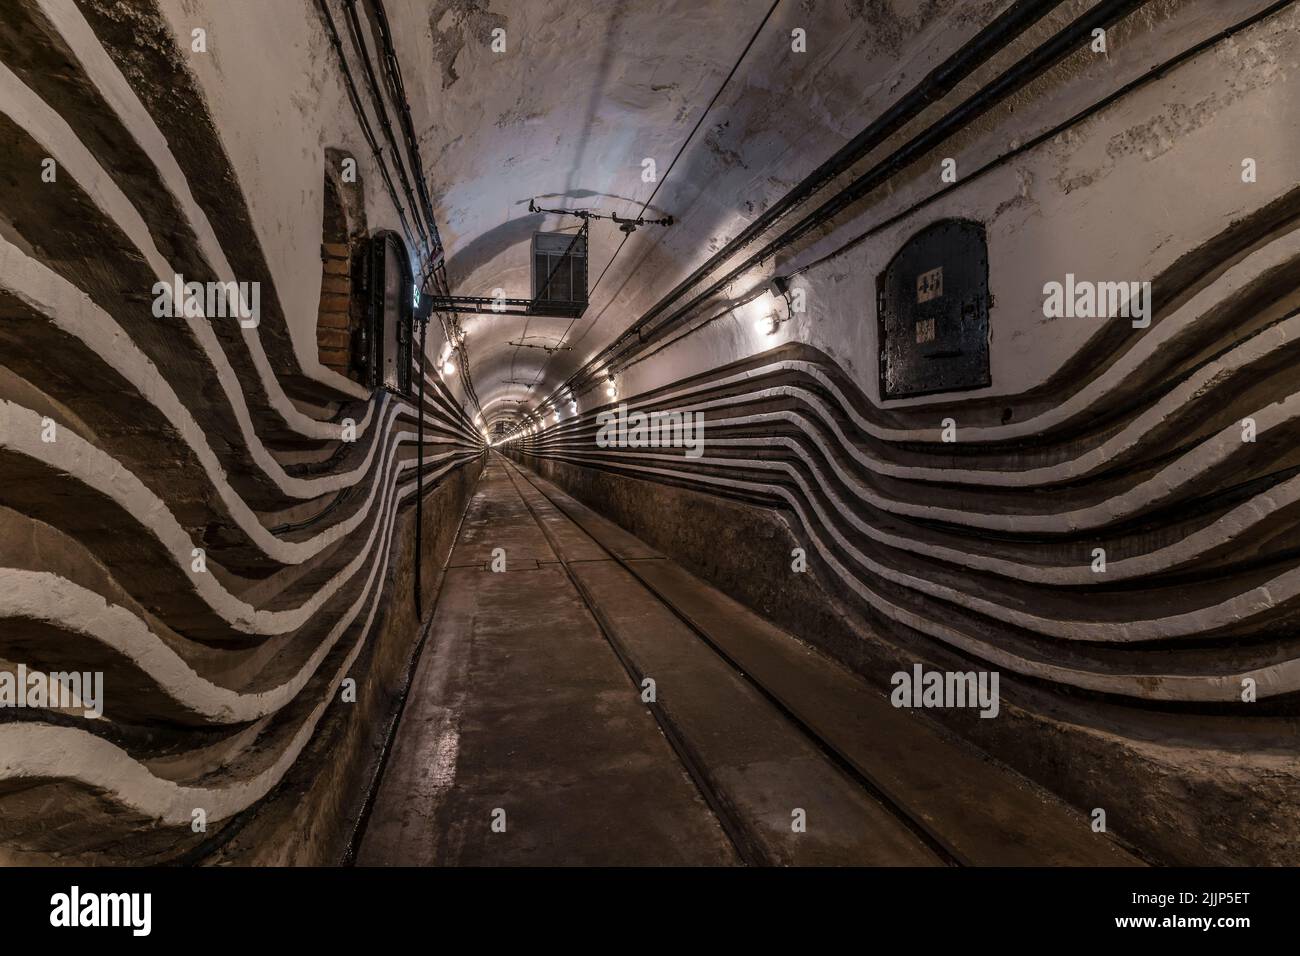 Tunnel in a historic bunker building. Stock Photo